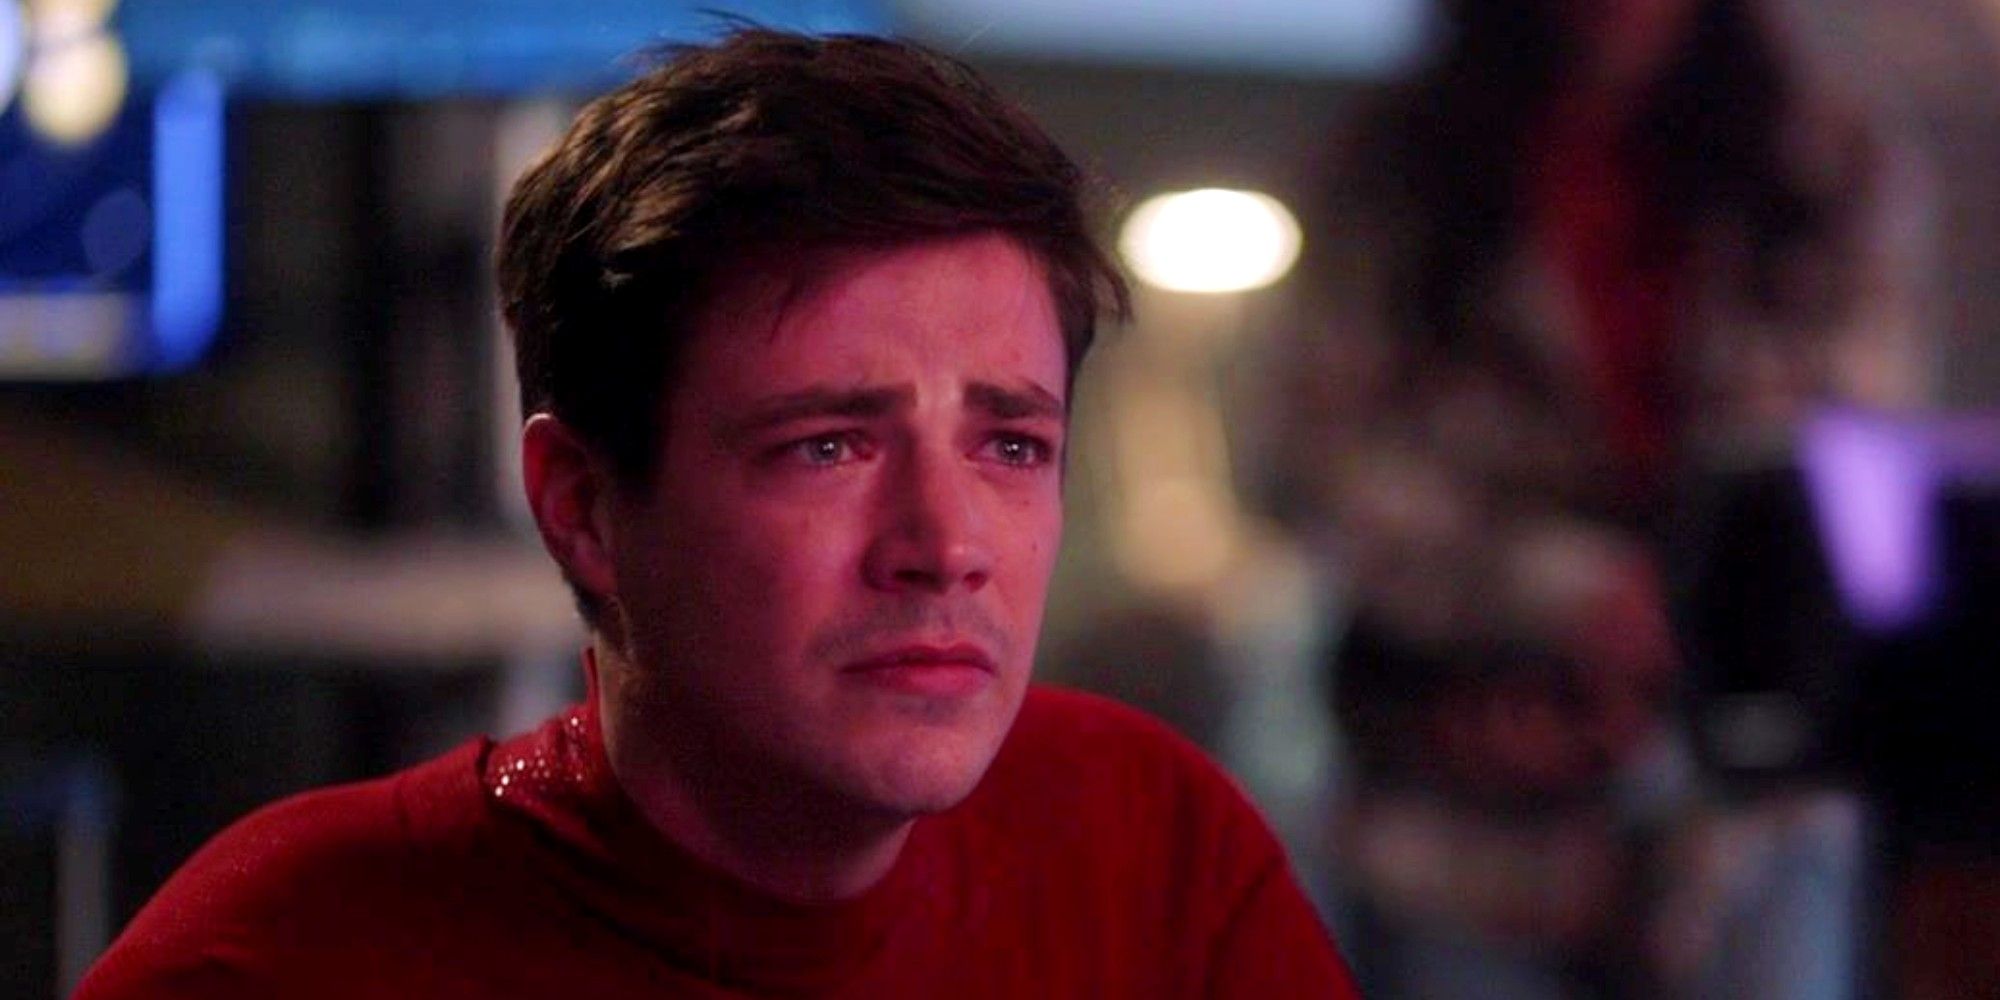 Grant Gustin as Barry Allen Looking Sad in The Flash Season 7 Episode 1